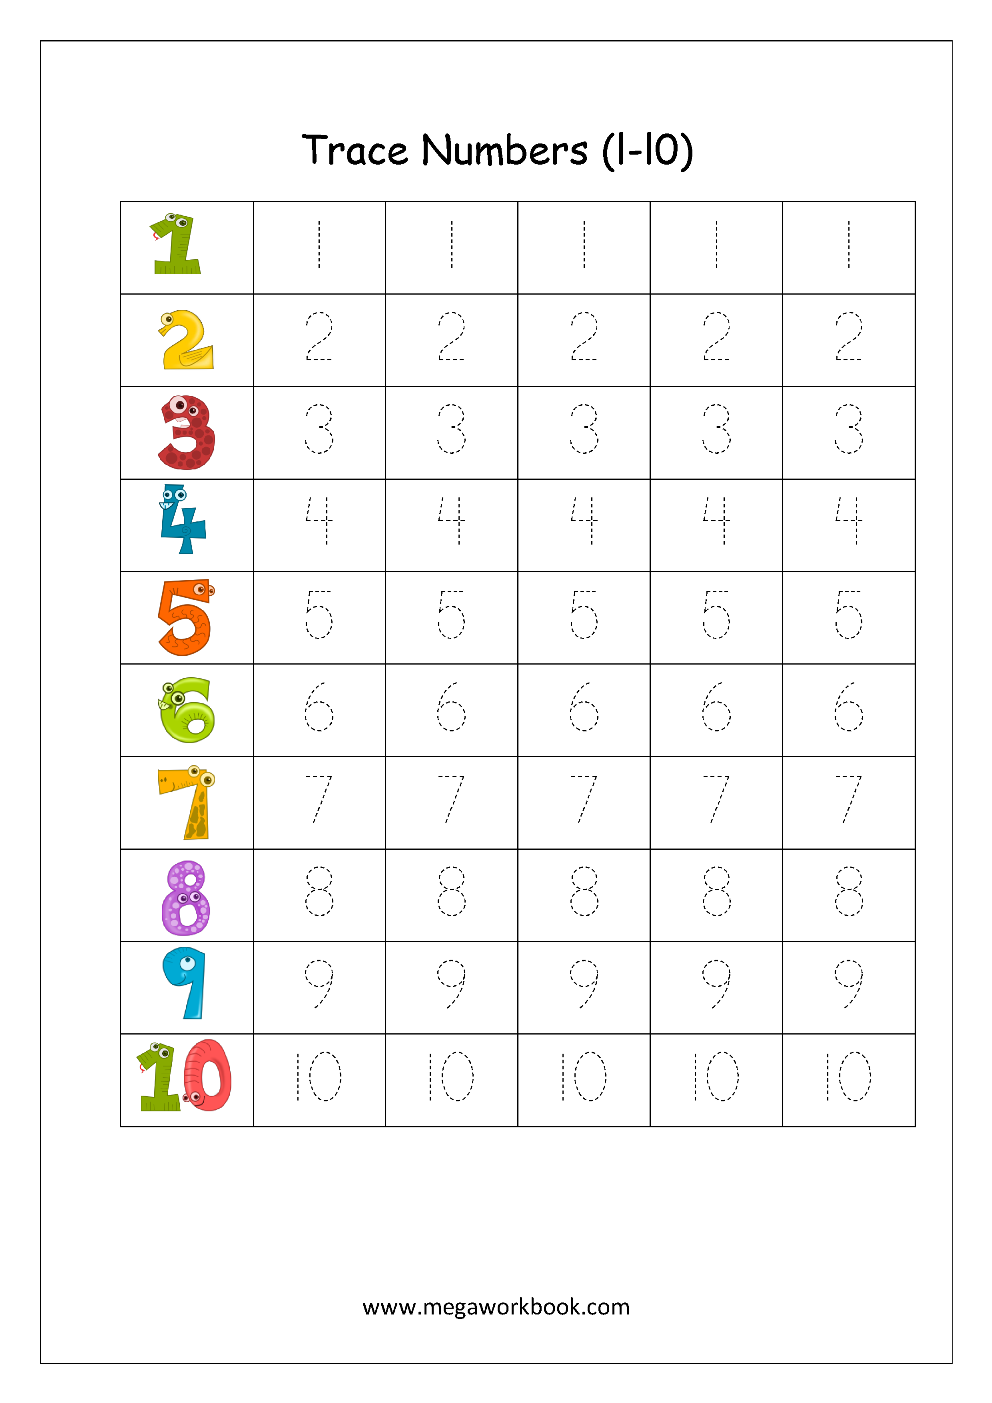 47-tracing-numbers-1-10-free-printable-image-the-numb